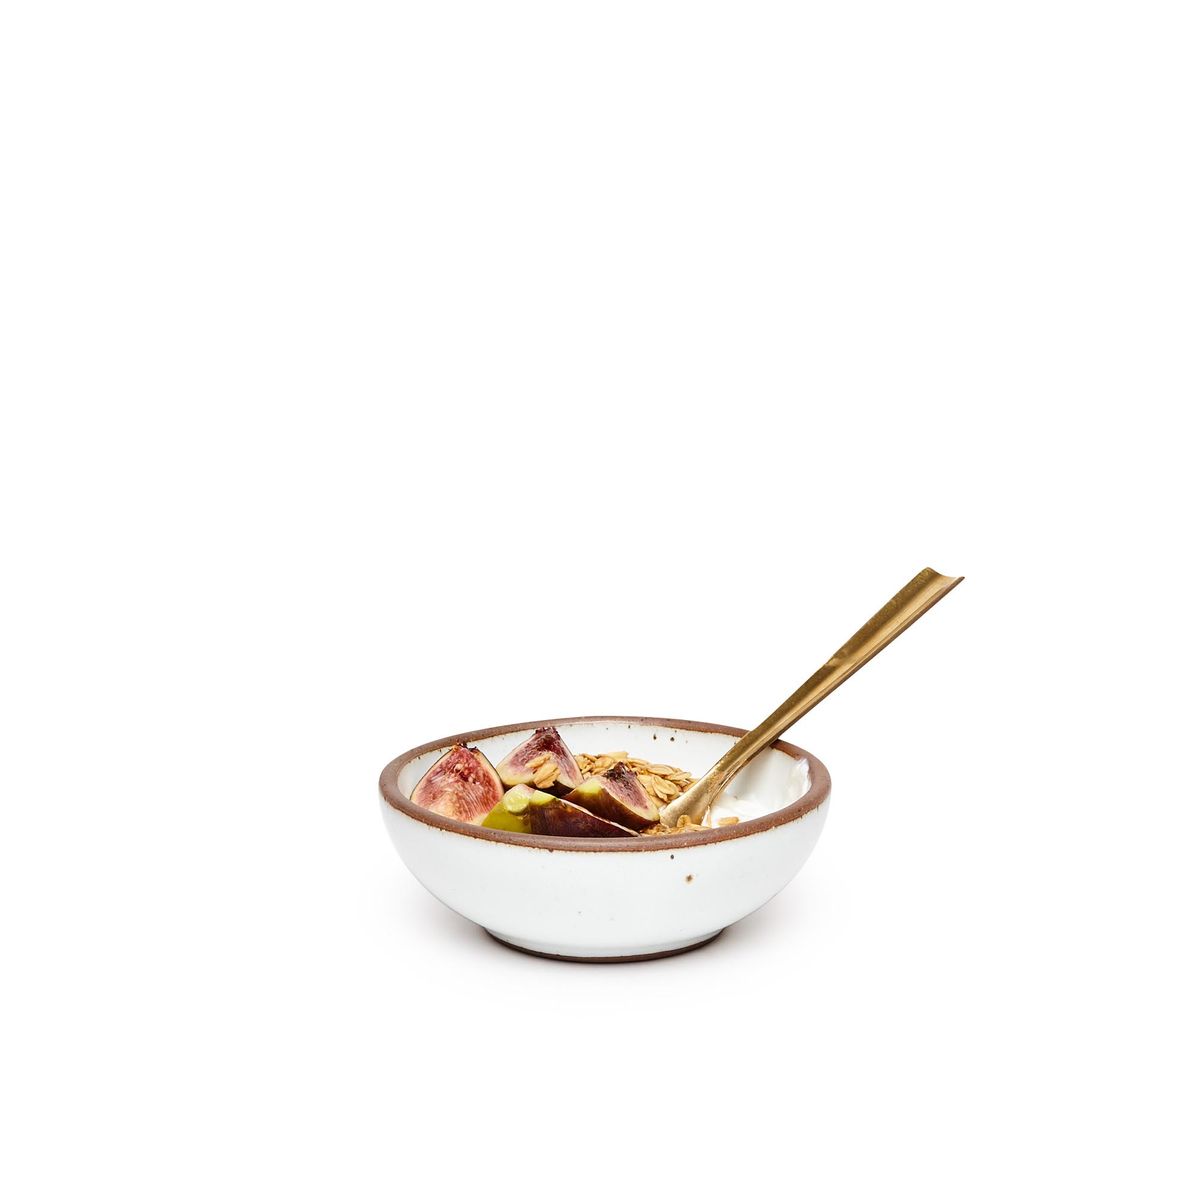 Yogurt and fruit with spoon in a small shallow ceramic bowl in a cool white color featuring iron speckles and an unglazed rim